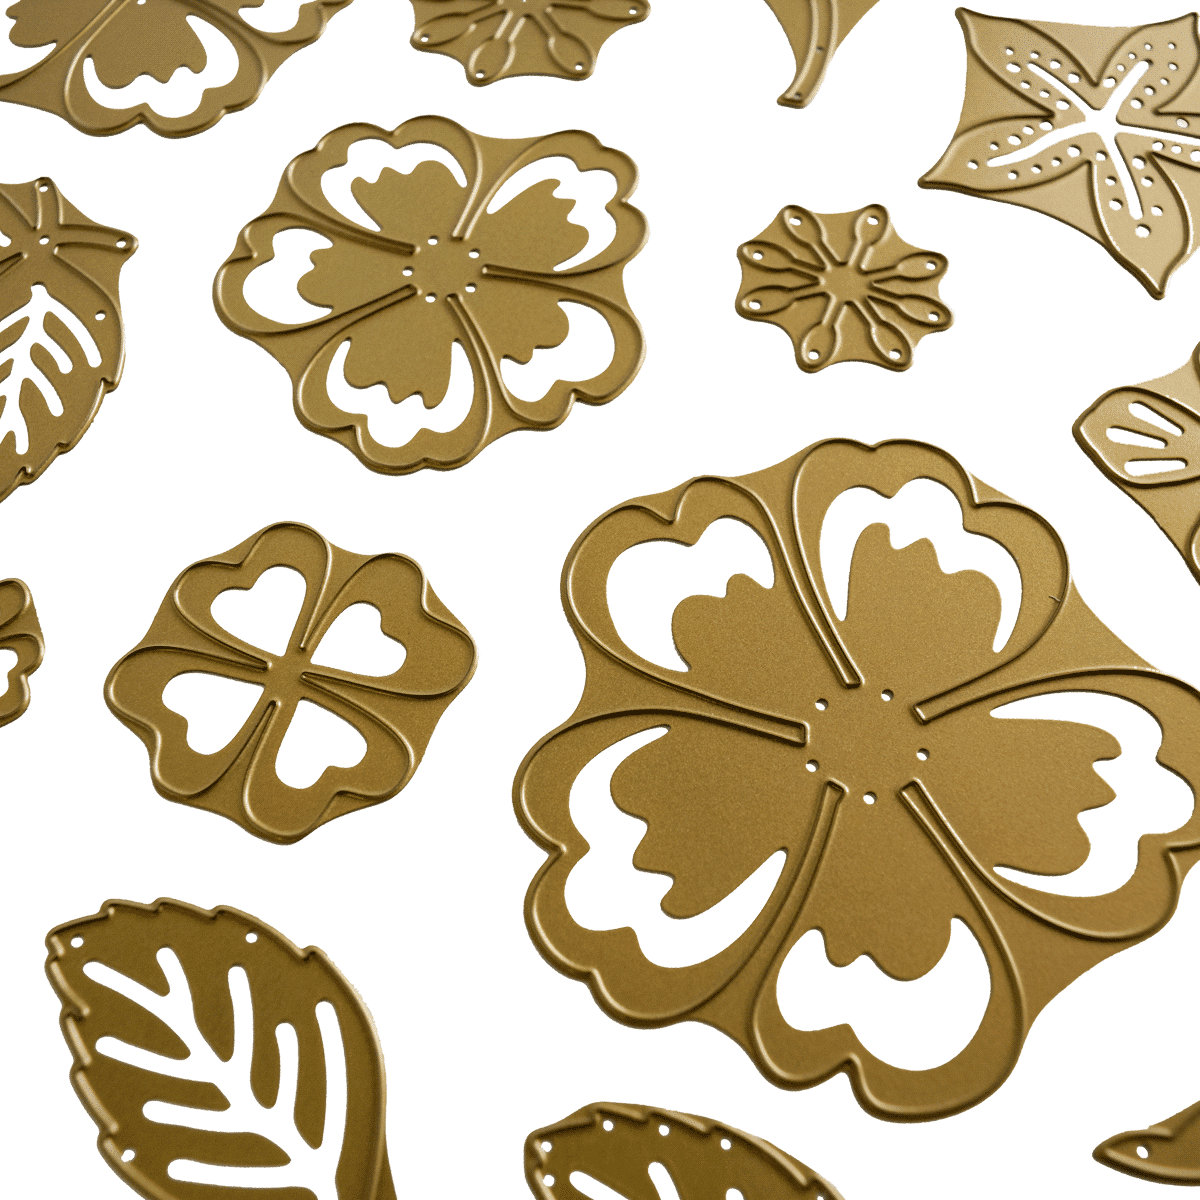 a bunch of different types of leaves on a white background.